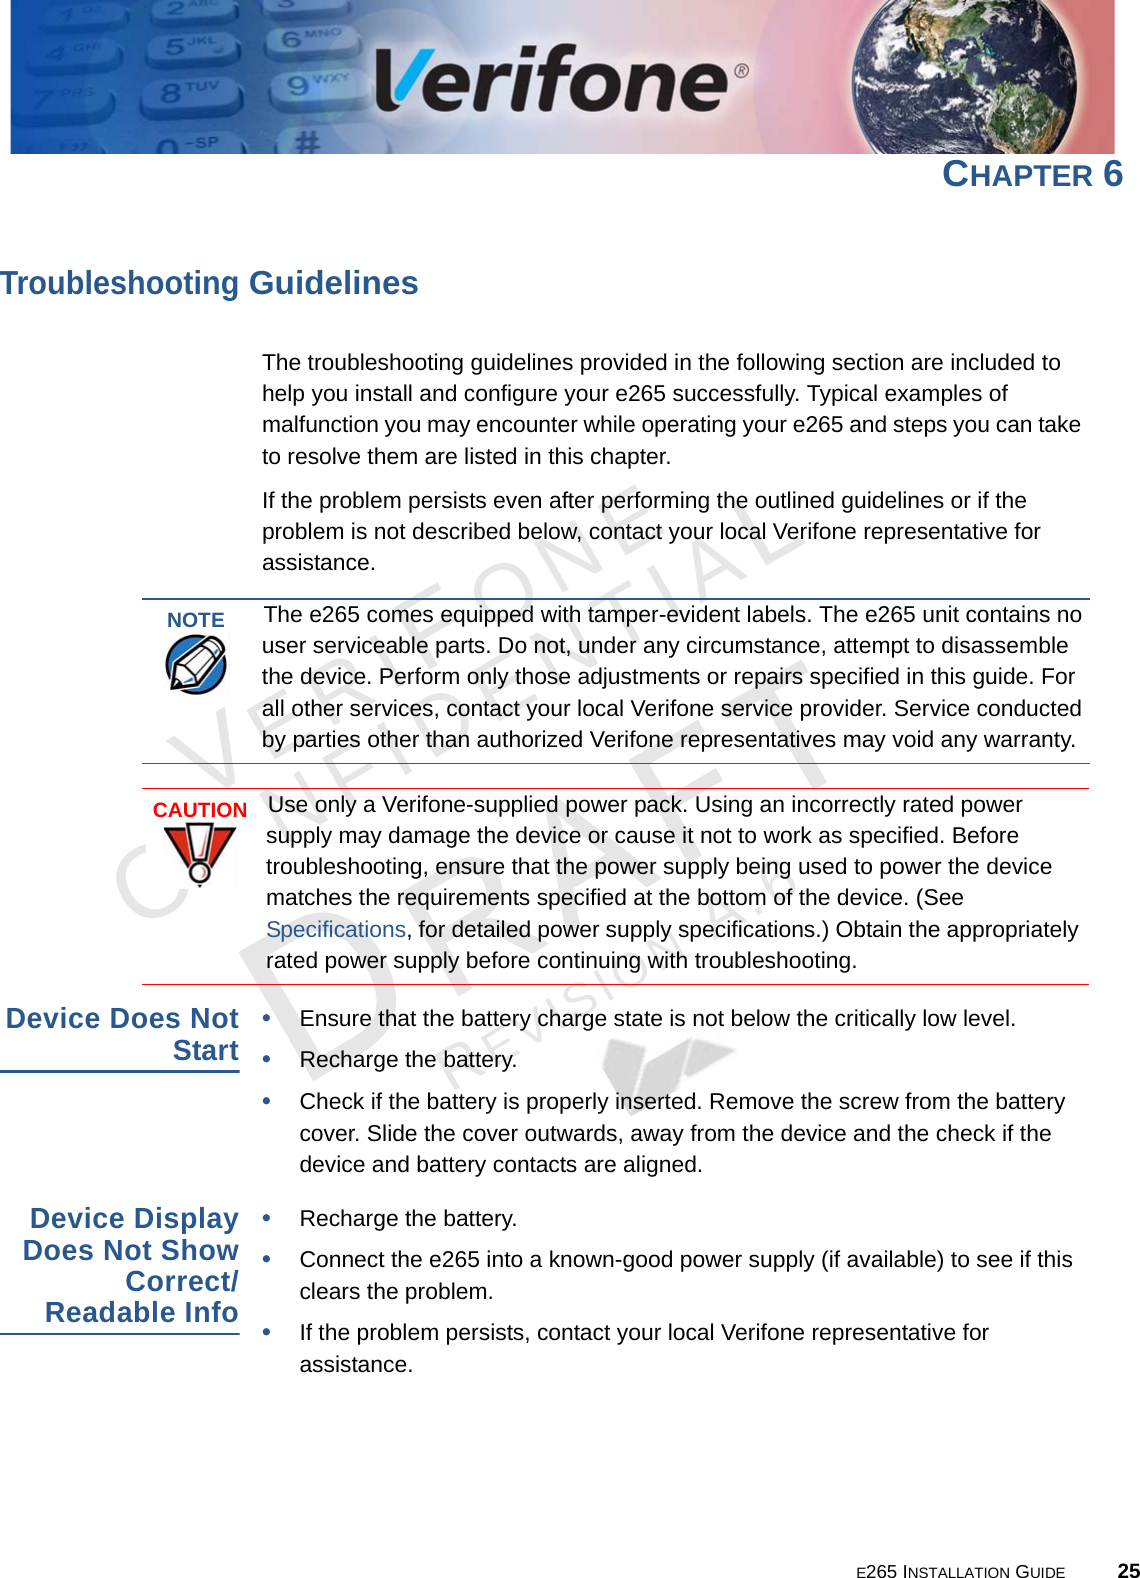 E265 INSTALLATION GUIDE 25VERIFONECONFIDENTIALREVISION A.6 CHAPTER 6Troubleshooting GuidelinesThe troubleshooting guidelines provided in the following section are included to help you install and configure your e265 successfully. Typical examples of malfunction you may encounter while operating your e265 and steps you can take to resolve them are listed in this chapter. If the problem persists even after performing the outlined guidelines or if the problem is not described below, contact your local Verifone representative for assistance. Device Does Not Start•Ensure that the battery charge state is not below the critically low level. •Recharge the battery.•Check if the battery is properly inserted. Remove the screw from the battery cover. Slide the cover outwards, away from the device and the check if the device and battery contacts are aligned.Device Display Does Not Show Correct/Readable Info•Recharge the battery.•Connect the e265 into a known-good power supply (if available) to see if this clears the problem.•If the problem persists, contact your local Verifone representative for assistance.NOTEThe e265 comes equipped with tamper-evident labels. The e265 unit contains no user serviceable parts. Do not, under any circumstance, attempt to disassemble the device. Perform only those adjustments or repairs specified in this guide. For all other services, contact your local Verifone service provider. Service conducted by parties other than authorized Verifone representatives may void any warranty.CAUTIONUse only a Verifone-supplied power pack. Using an incorrectly rated power supply may damage the device or cause it not to work as specified. Before troubleshooting, ensure that the power supply being used to power the device matches the requirements specified at the bottom of the device. (See Specifications, for detailed power supply specifications.) Obtain the appropriately rated power supply before continuing with troubleshooting.